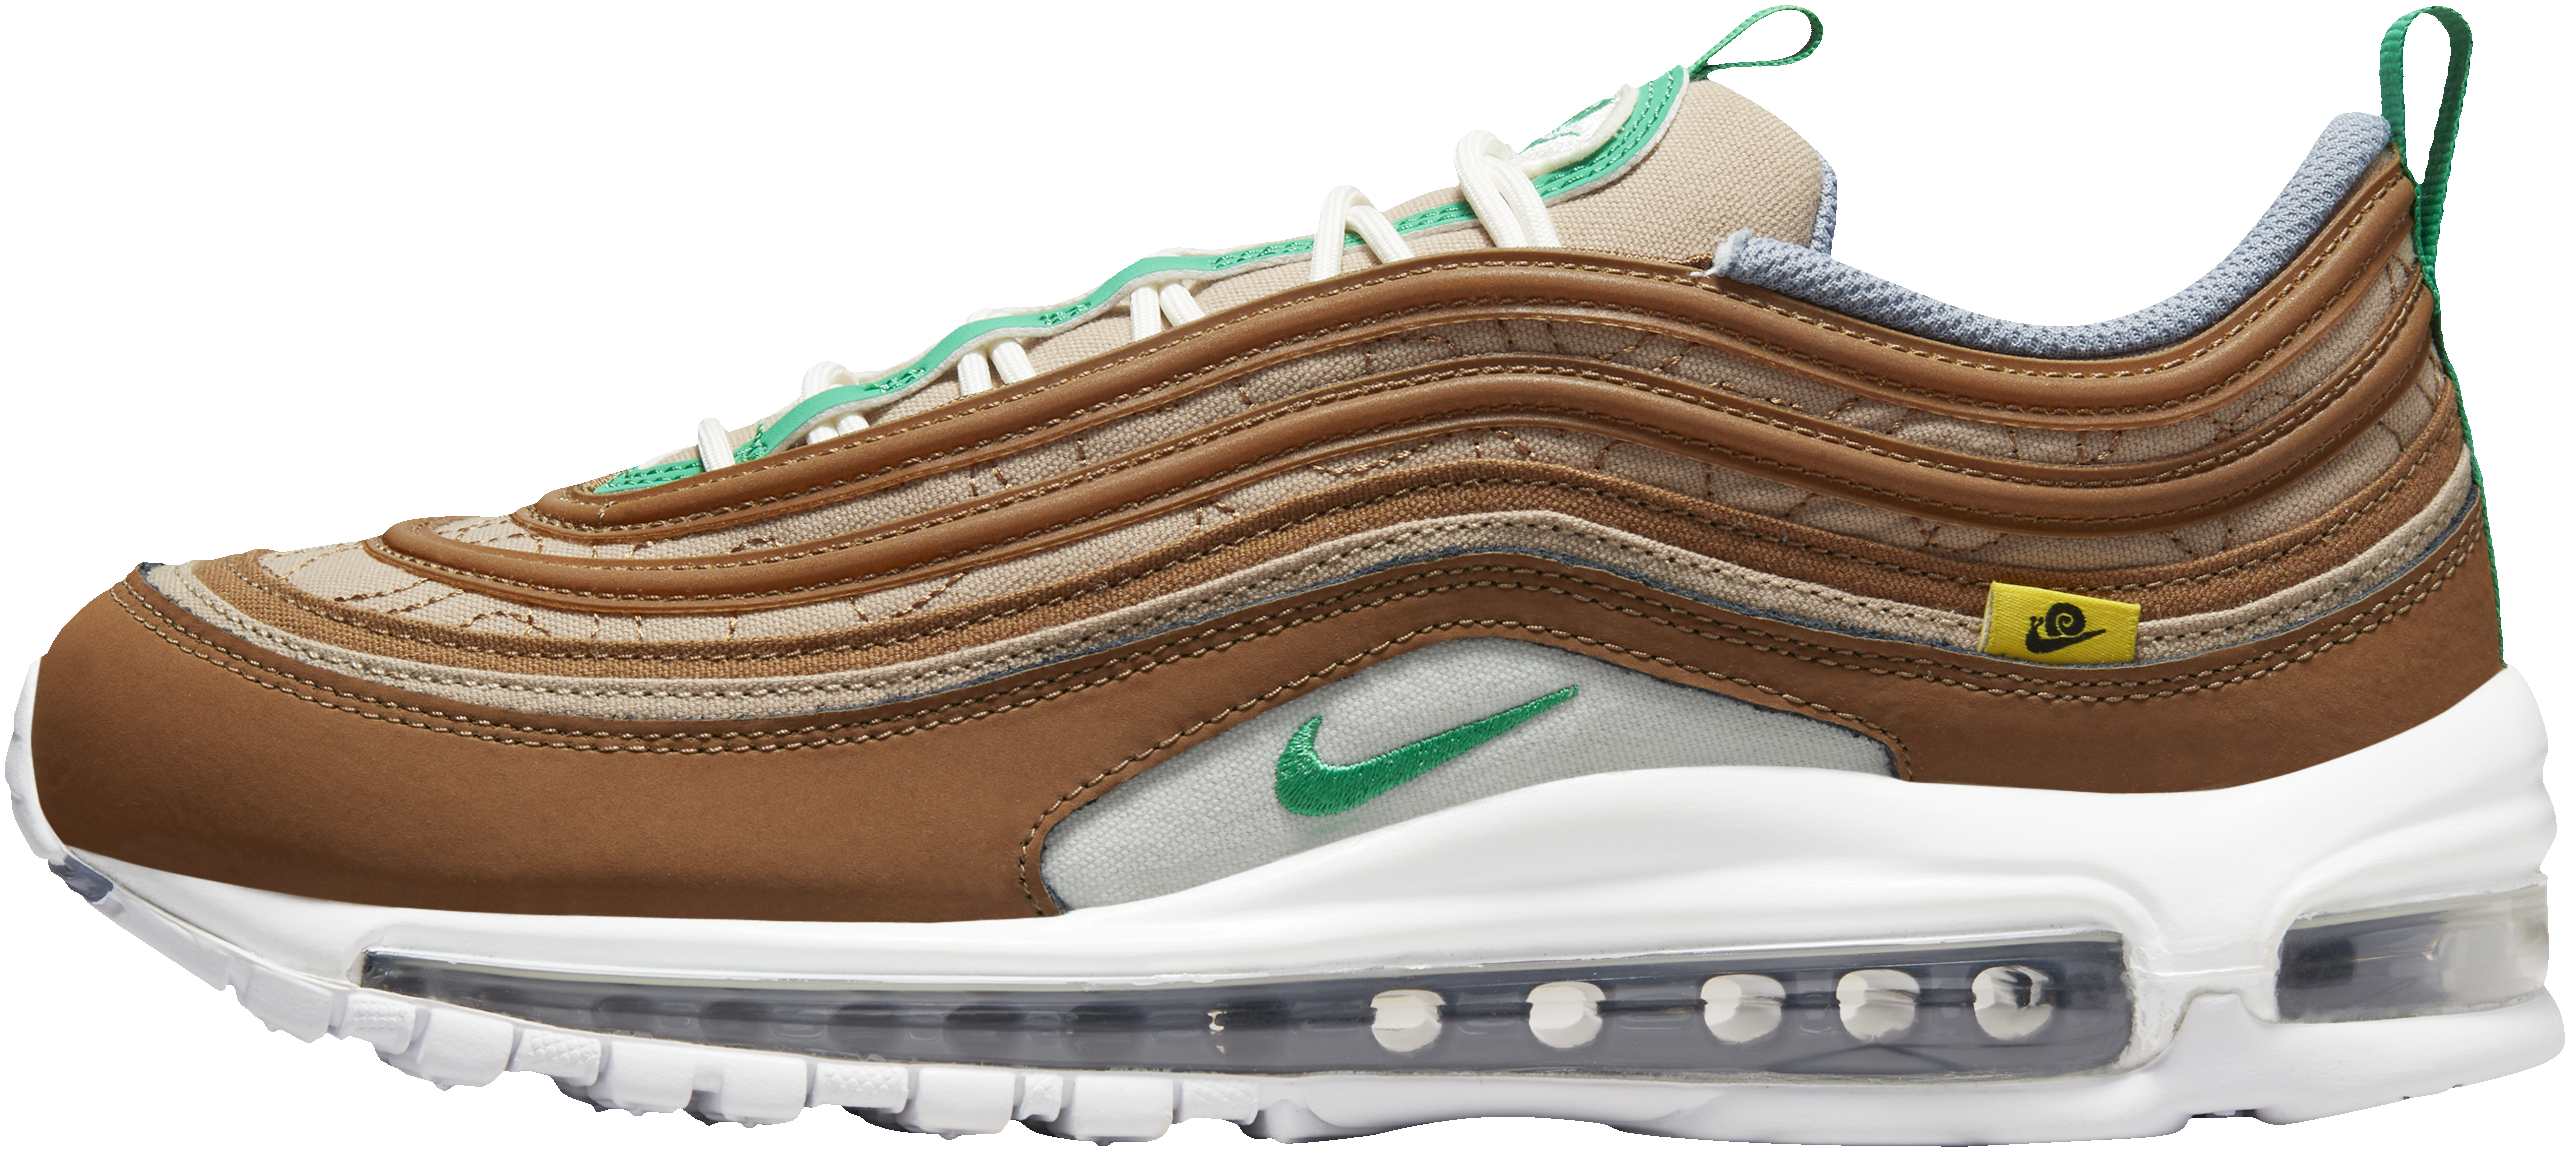 Adaptability Noble fog Nike Air Max 97 SE sneakers in 10 colors (only $144) | RunRepeat